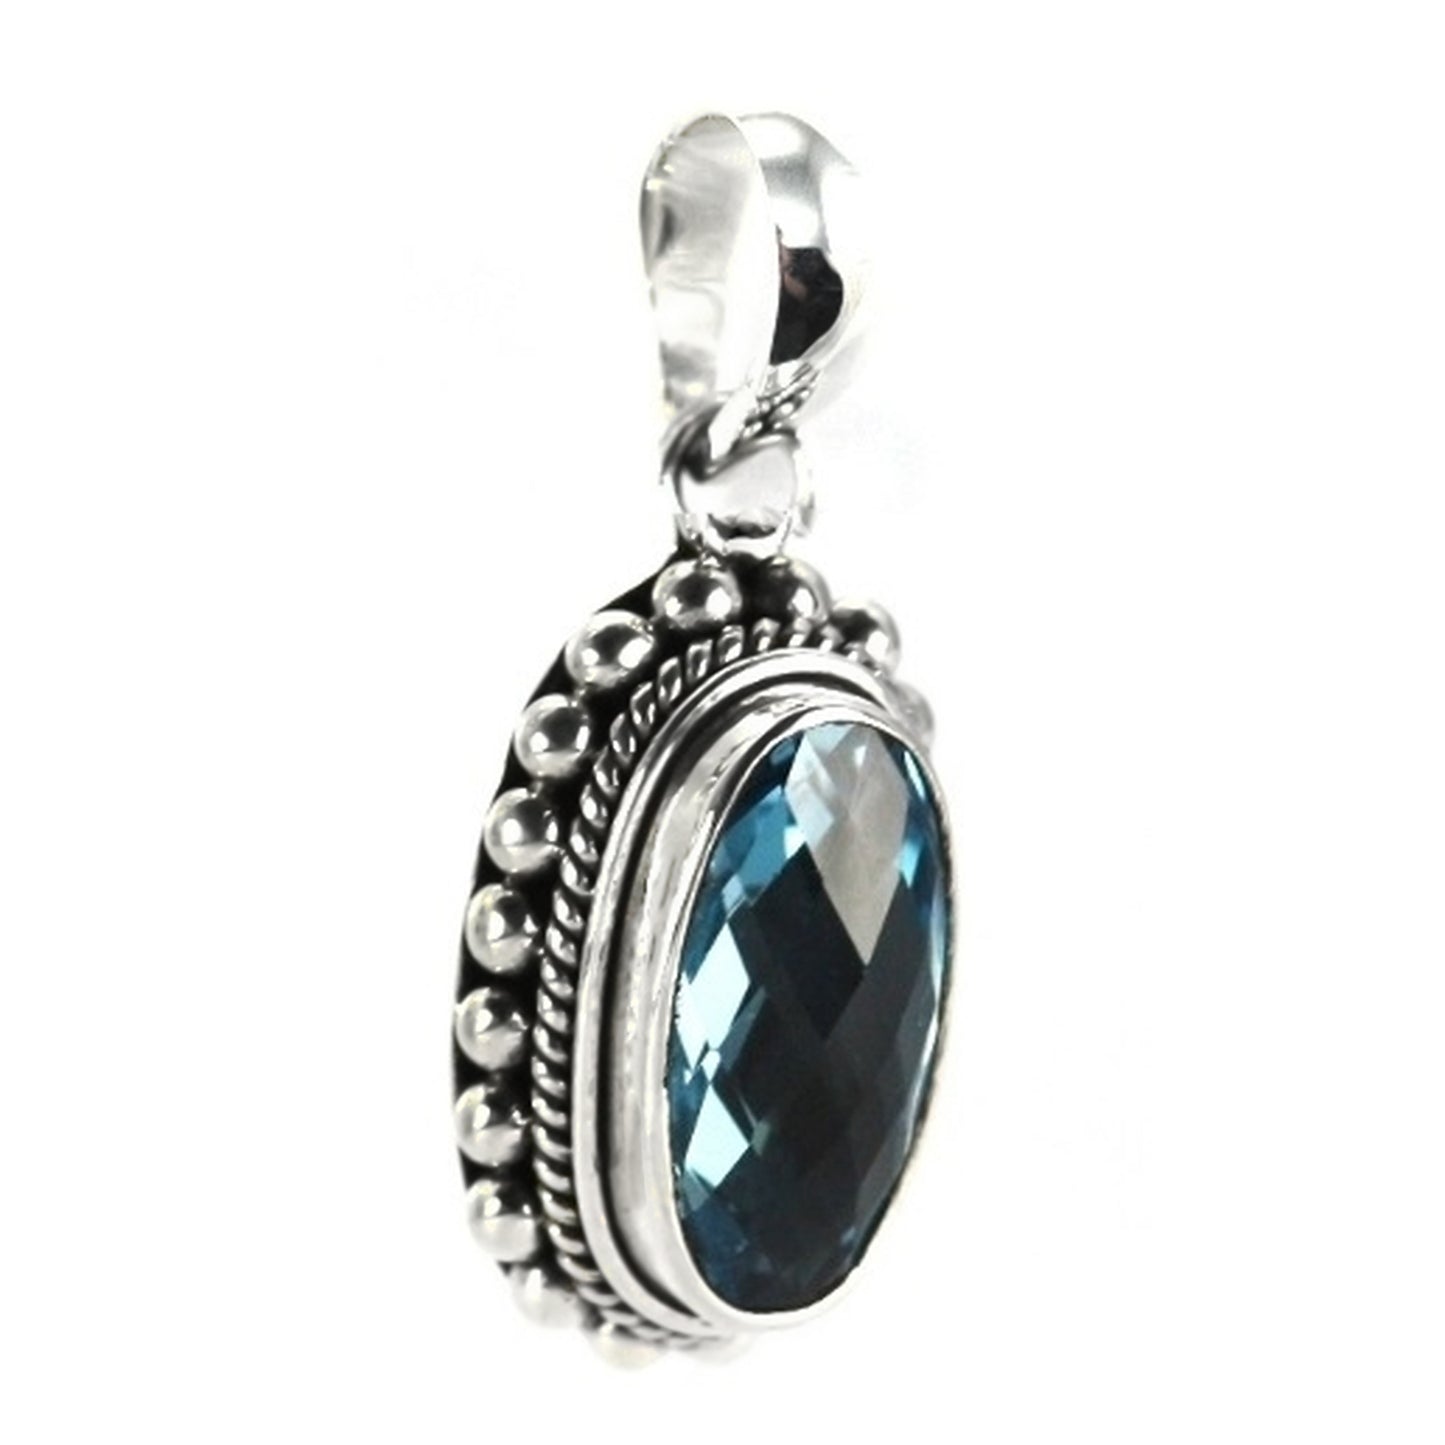 Silver pendant with oval blue topaz gemstone.